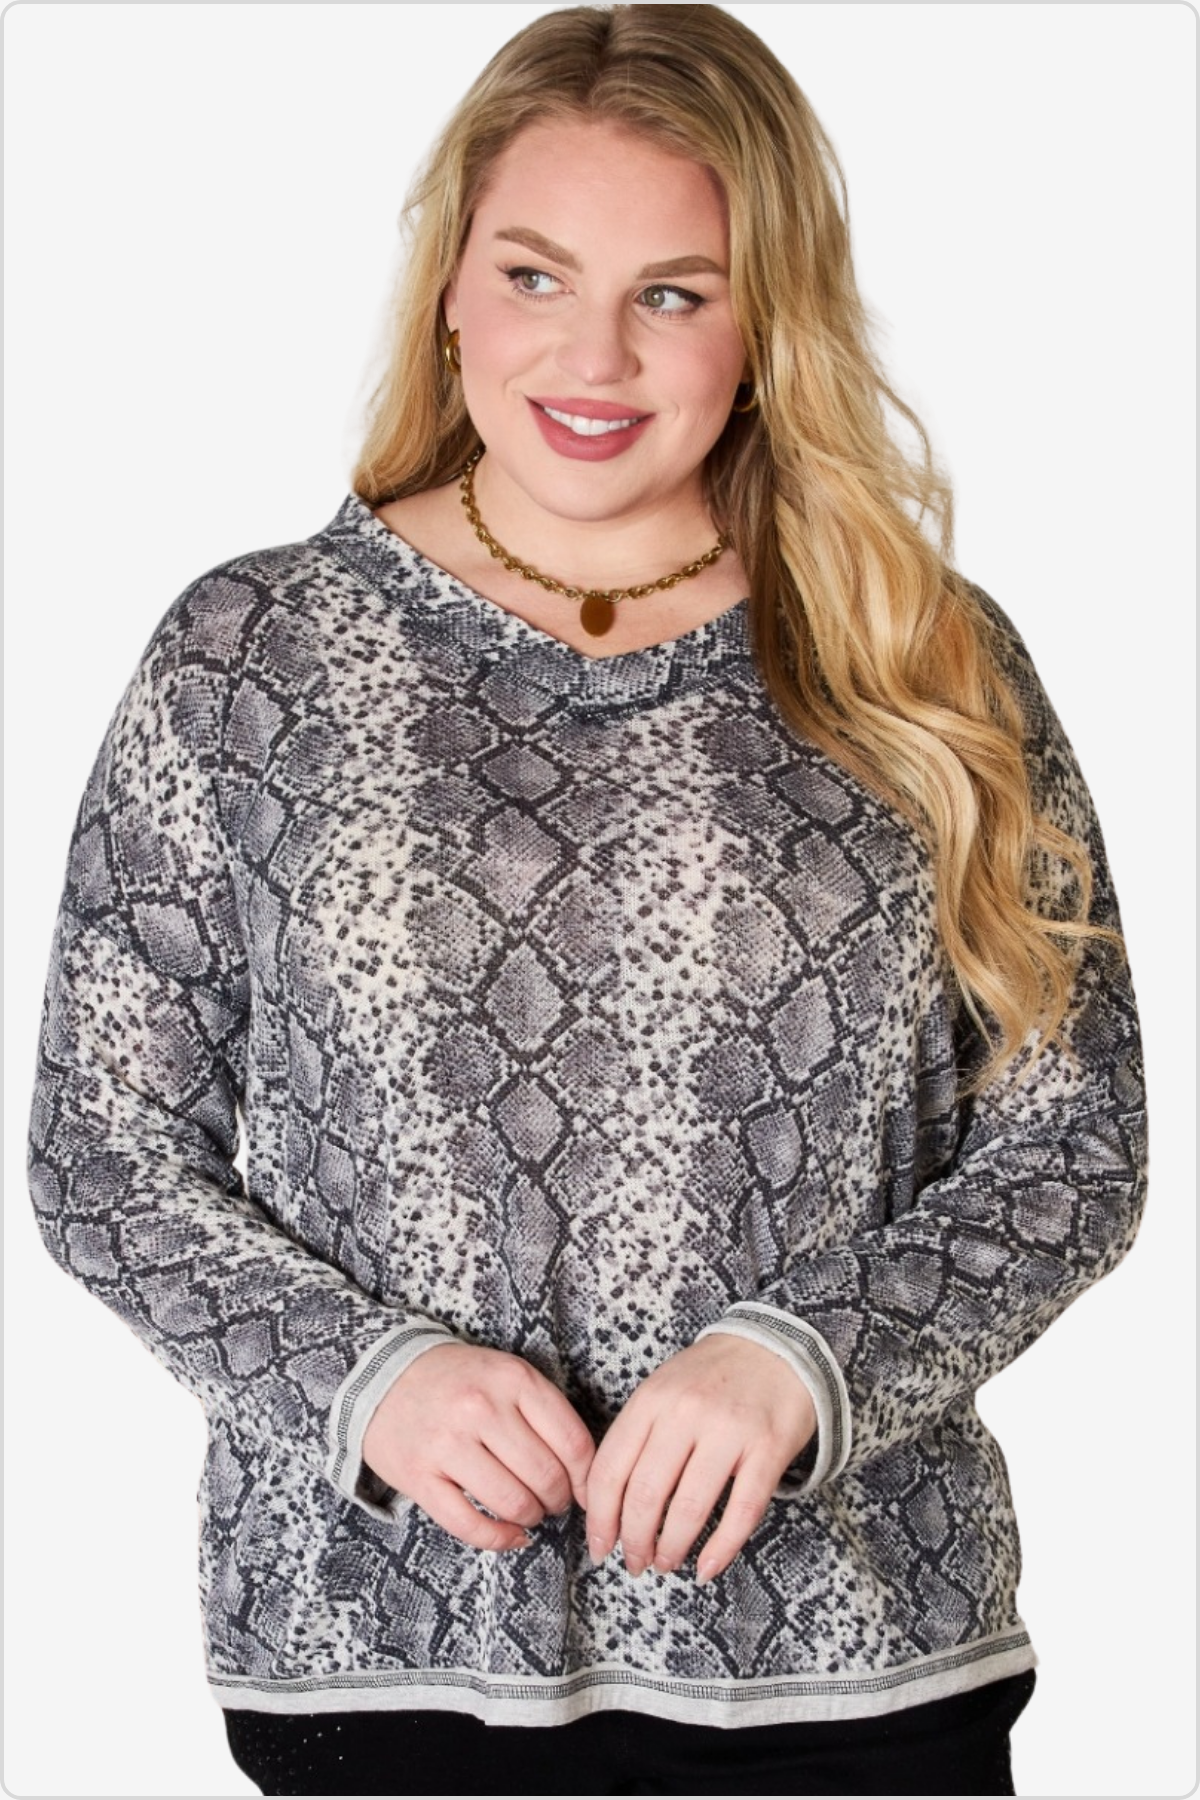 Woman with golden locks wearing a chic snakeskin print sweater, adding an edgy yet cozy touch to her outfit.